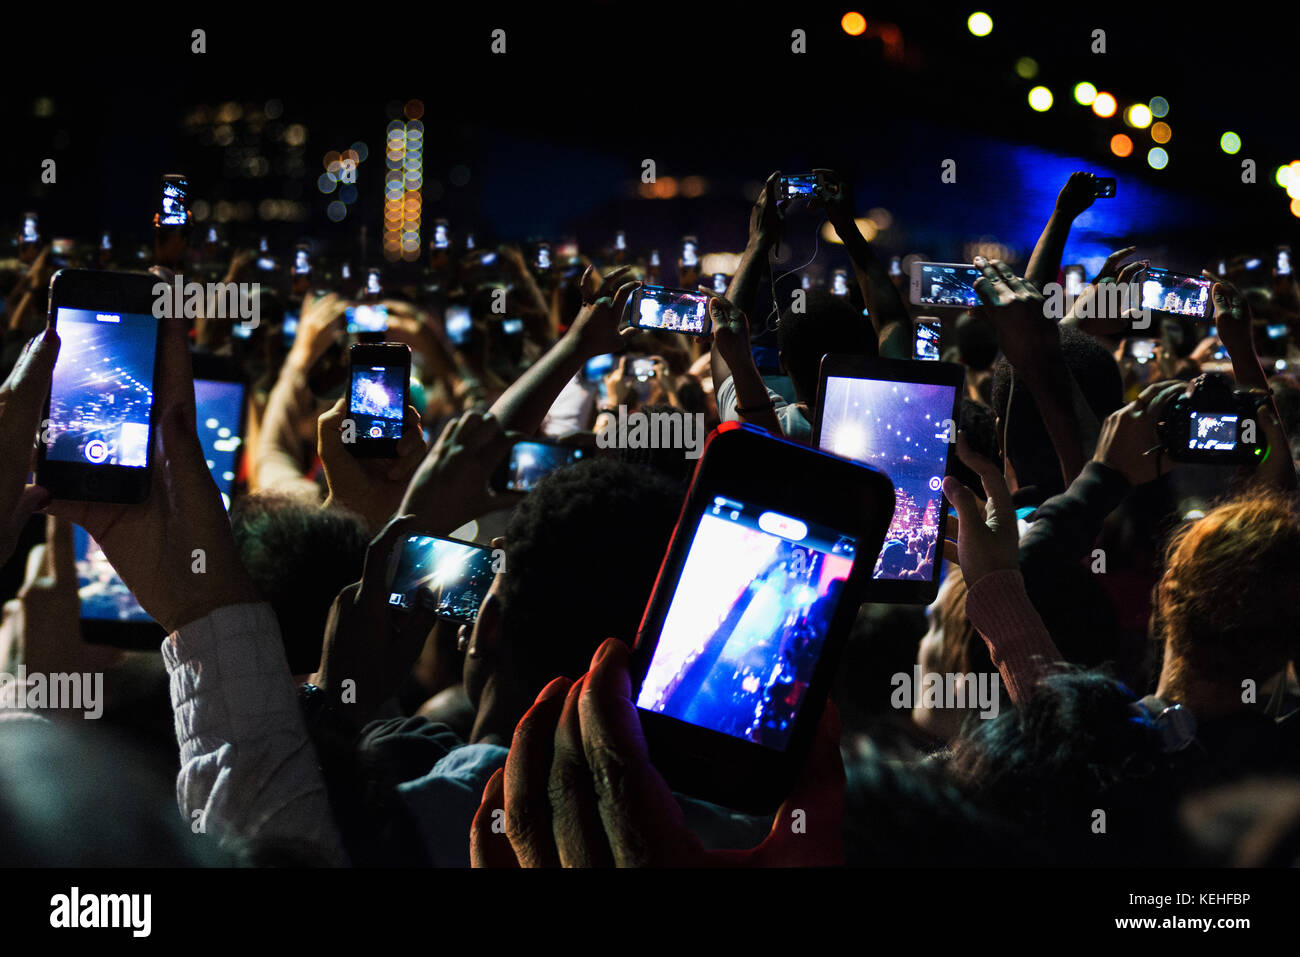 Crowd of people recording video with cell phones at night Stock Photo